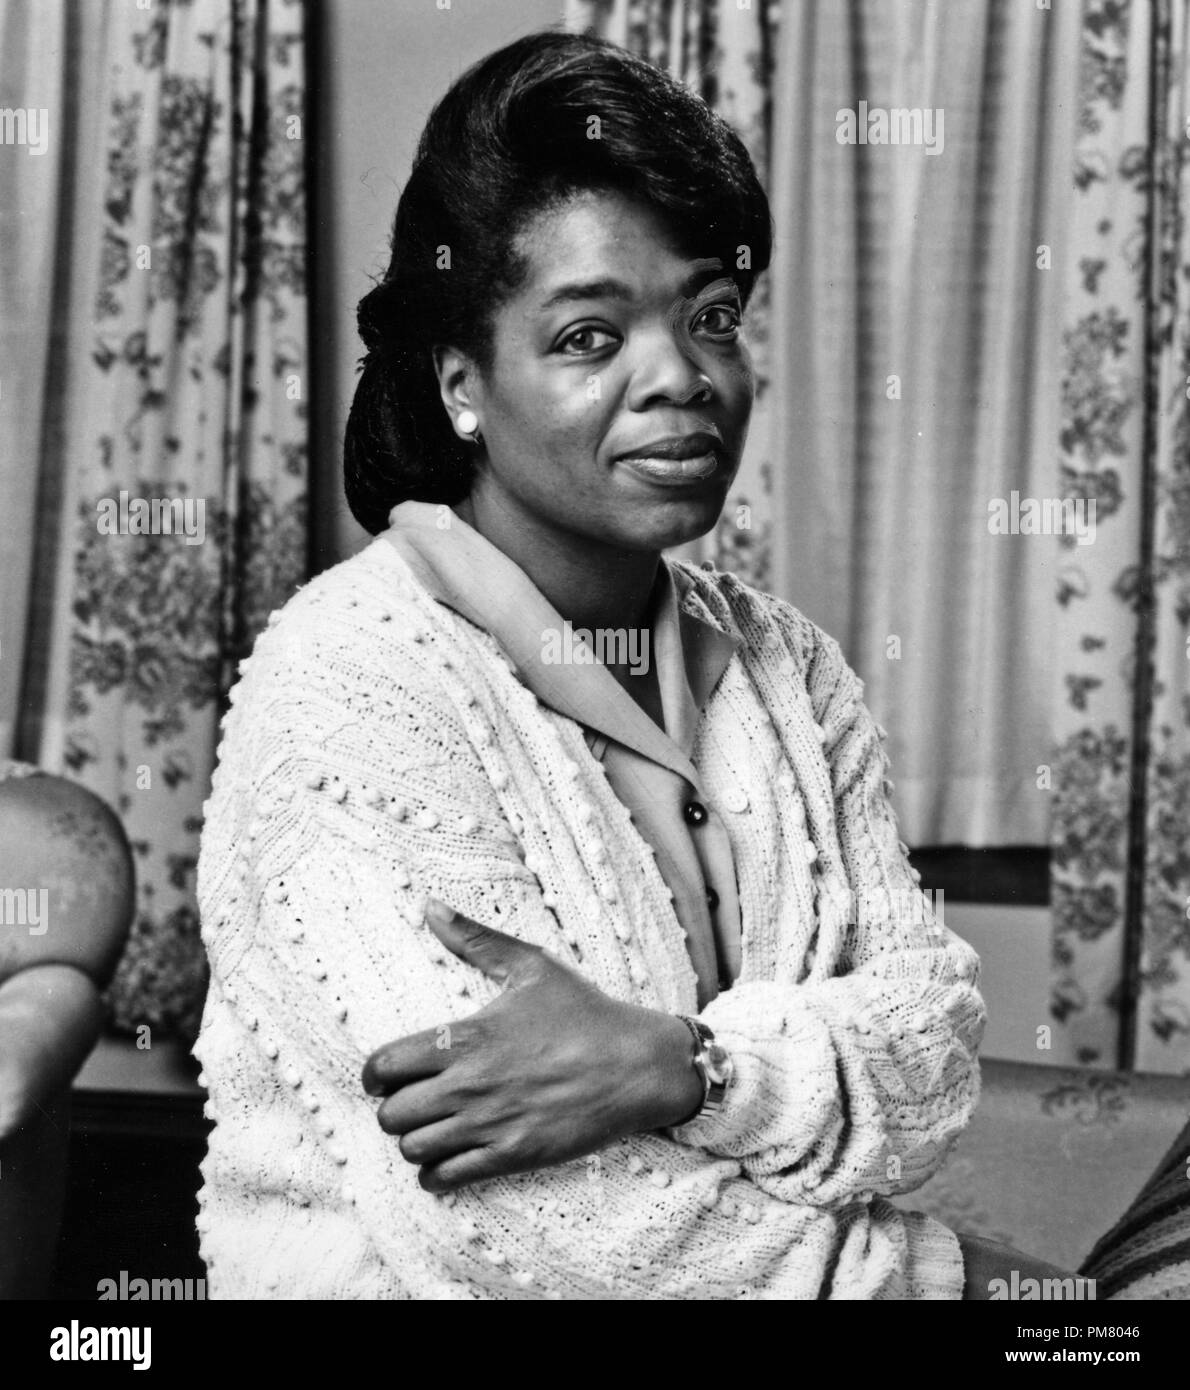 Film still or Publicity still from 'Brewster Place' Oprah Winfrey 1990   All Rights Reserved   File Reference # 31571287THA  For Editorial Use Only Stock Photo